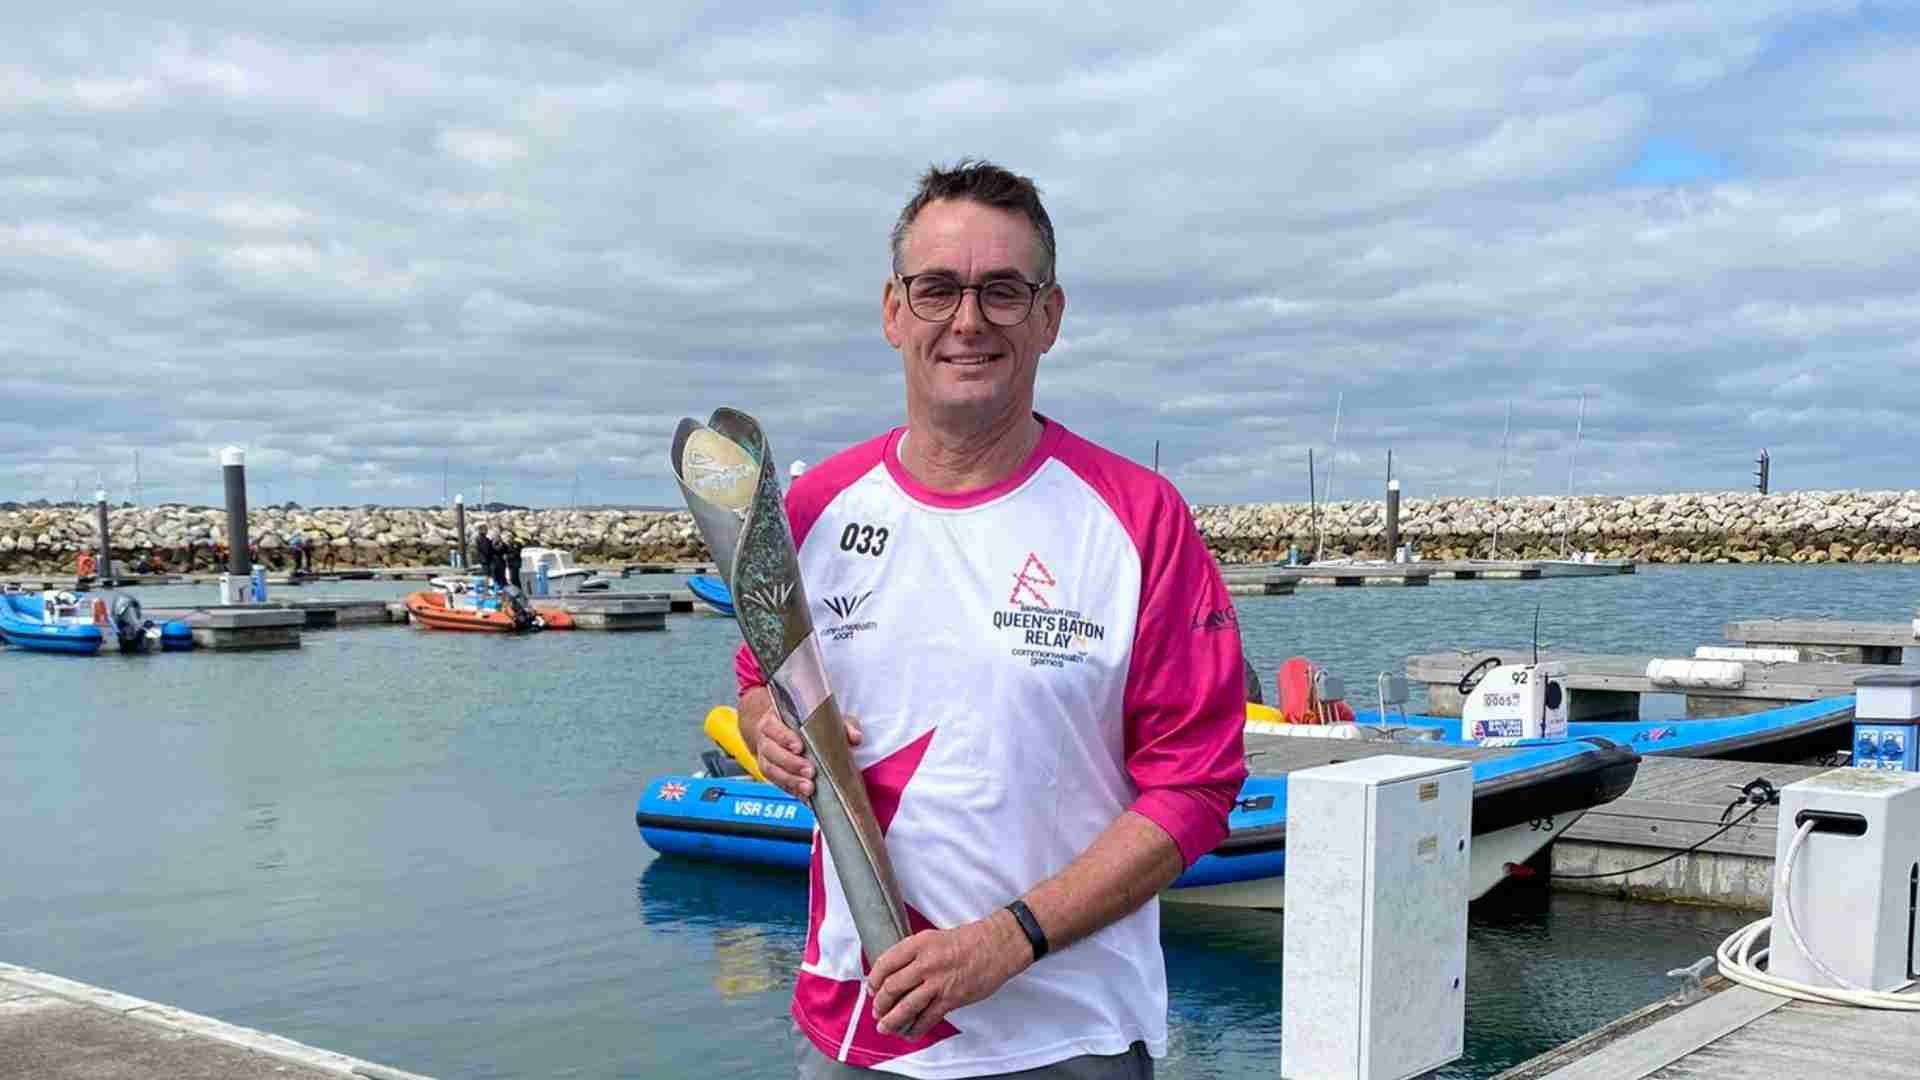 Steve carries the Commonwealth Games Baton!